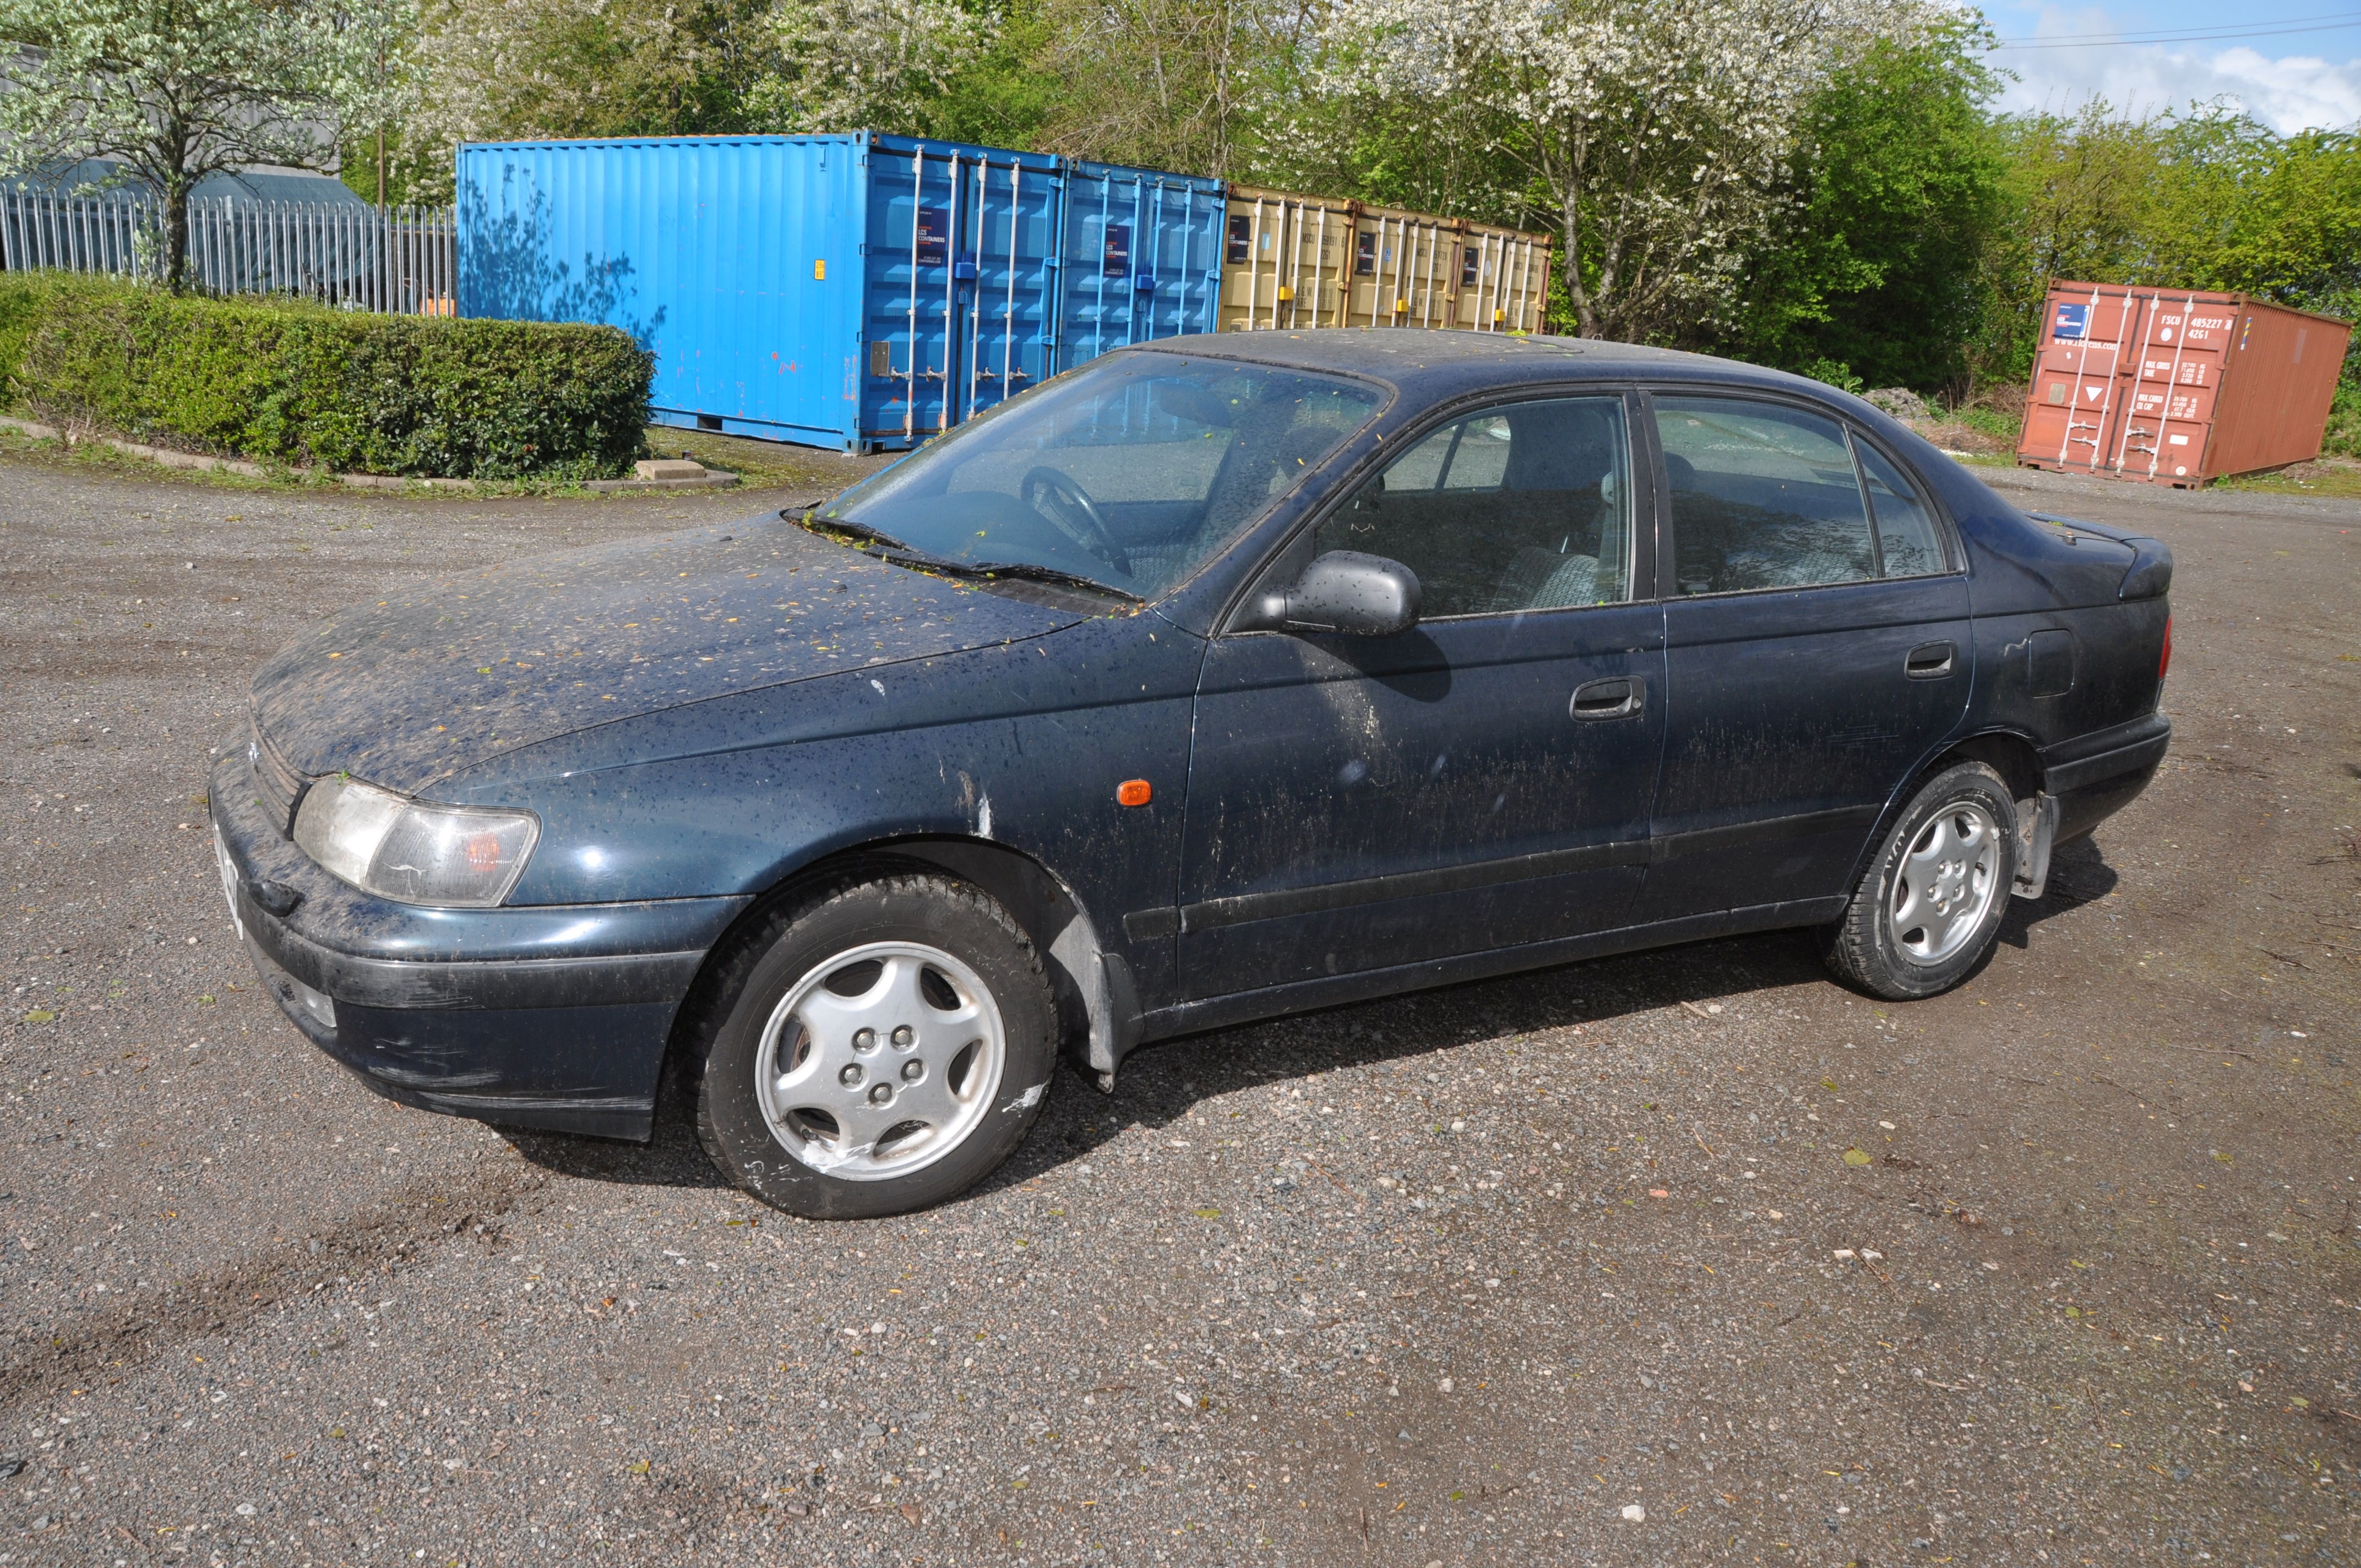 A 1994 TOYOTA CARINA E EXECUTIVE A FOUR DOOR SALOON CAR in blue, first registered 30/9/1994 under - Image 2 of 13